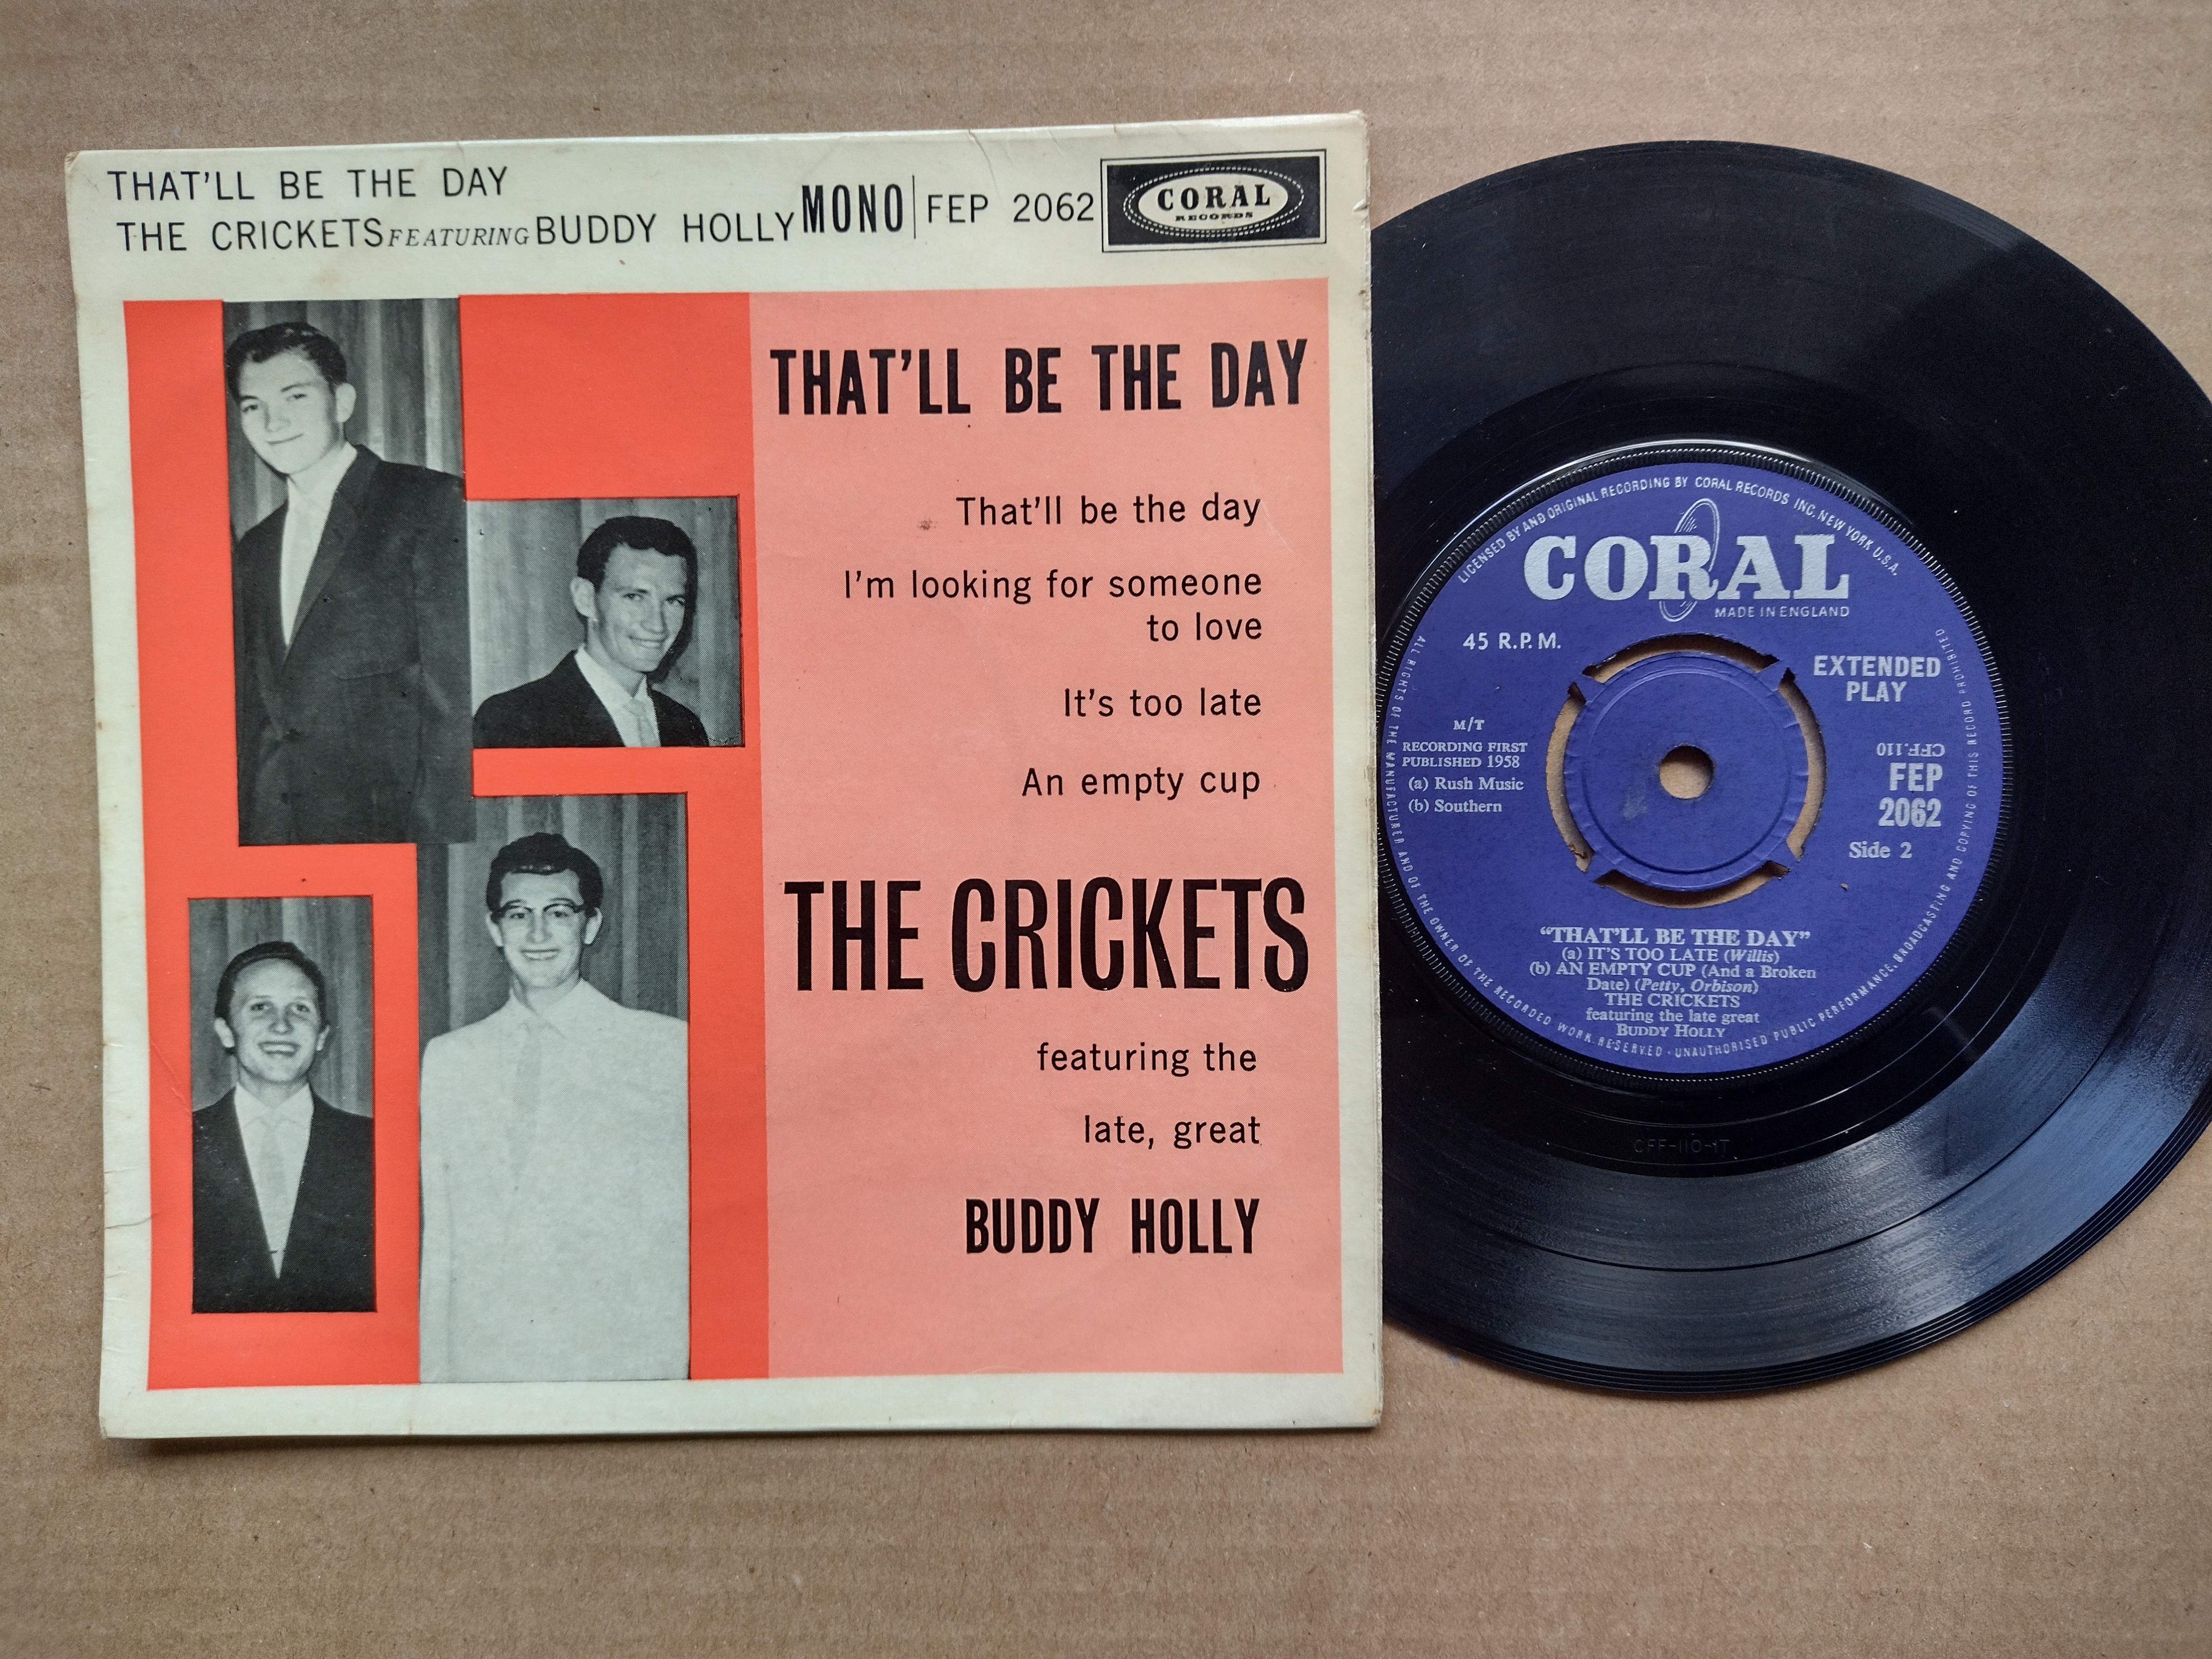 MUSIC EP RECORD - THE CRICKETS FEATURING BUDDY HOLLY THAT'LL BE THE DAY